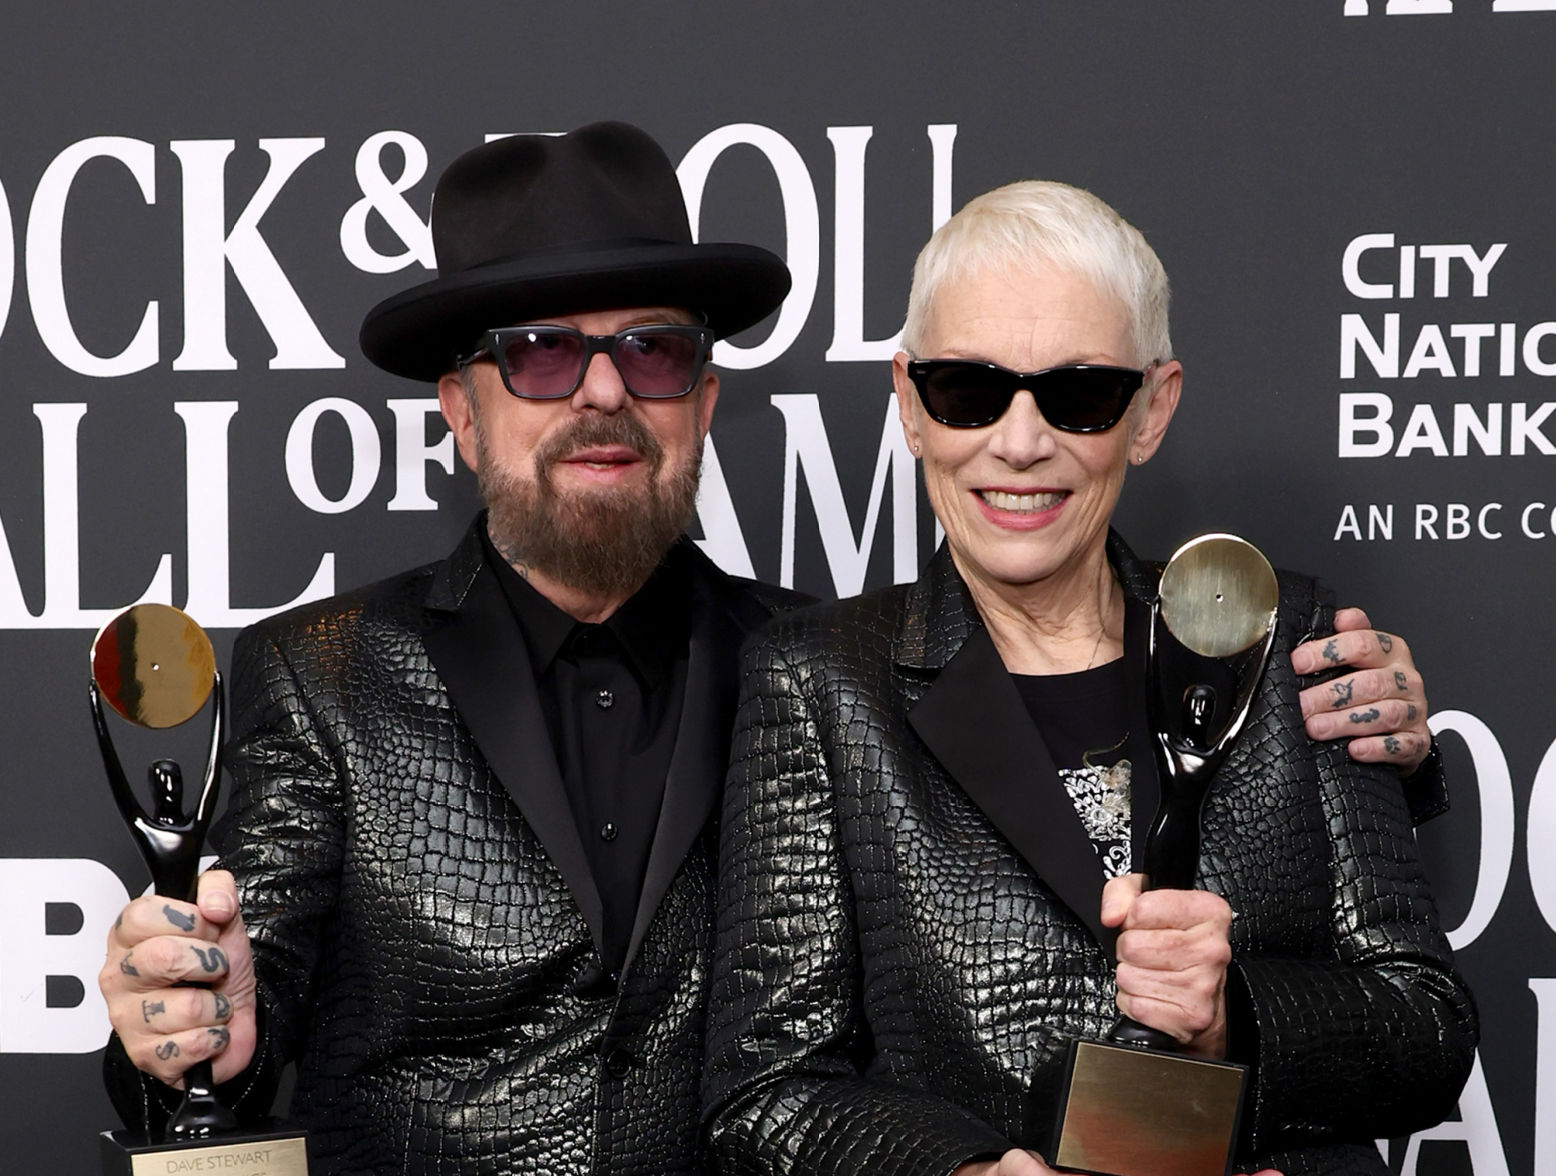 Eurythmics' Dave Stewart joins daughter's 'American Idol' audition